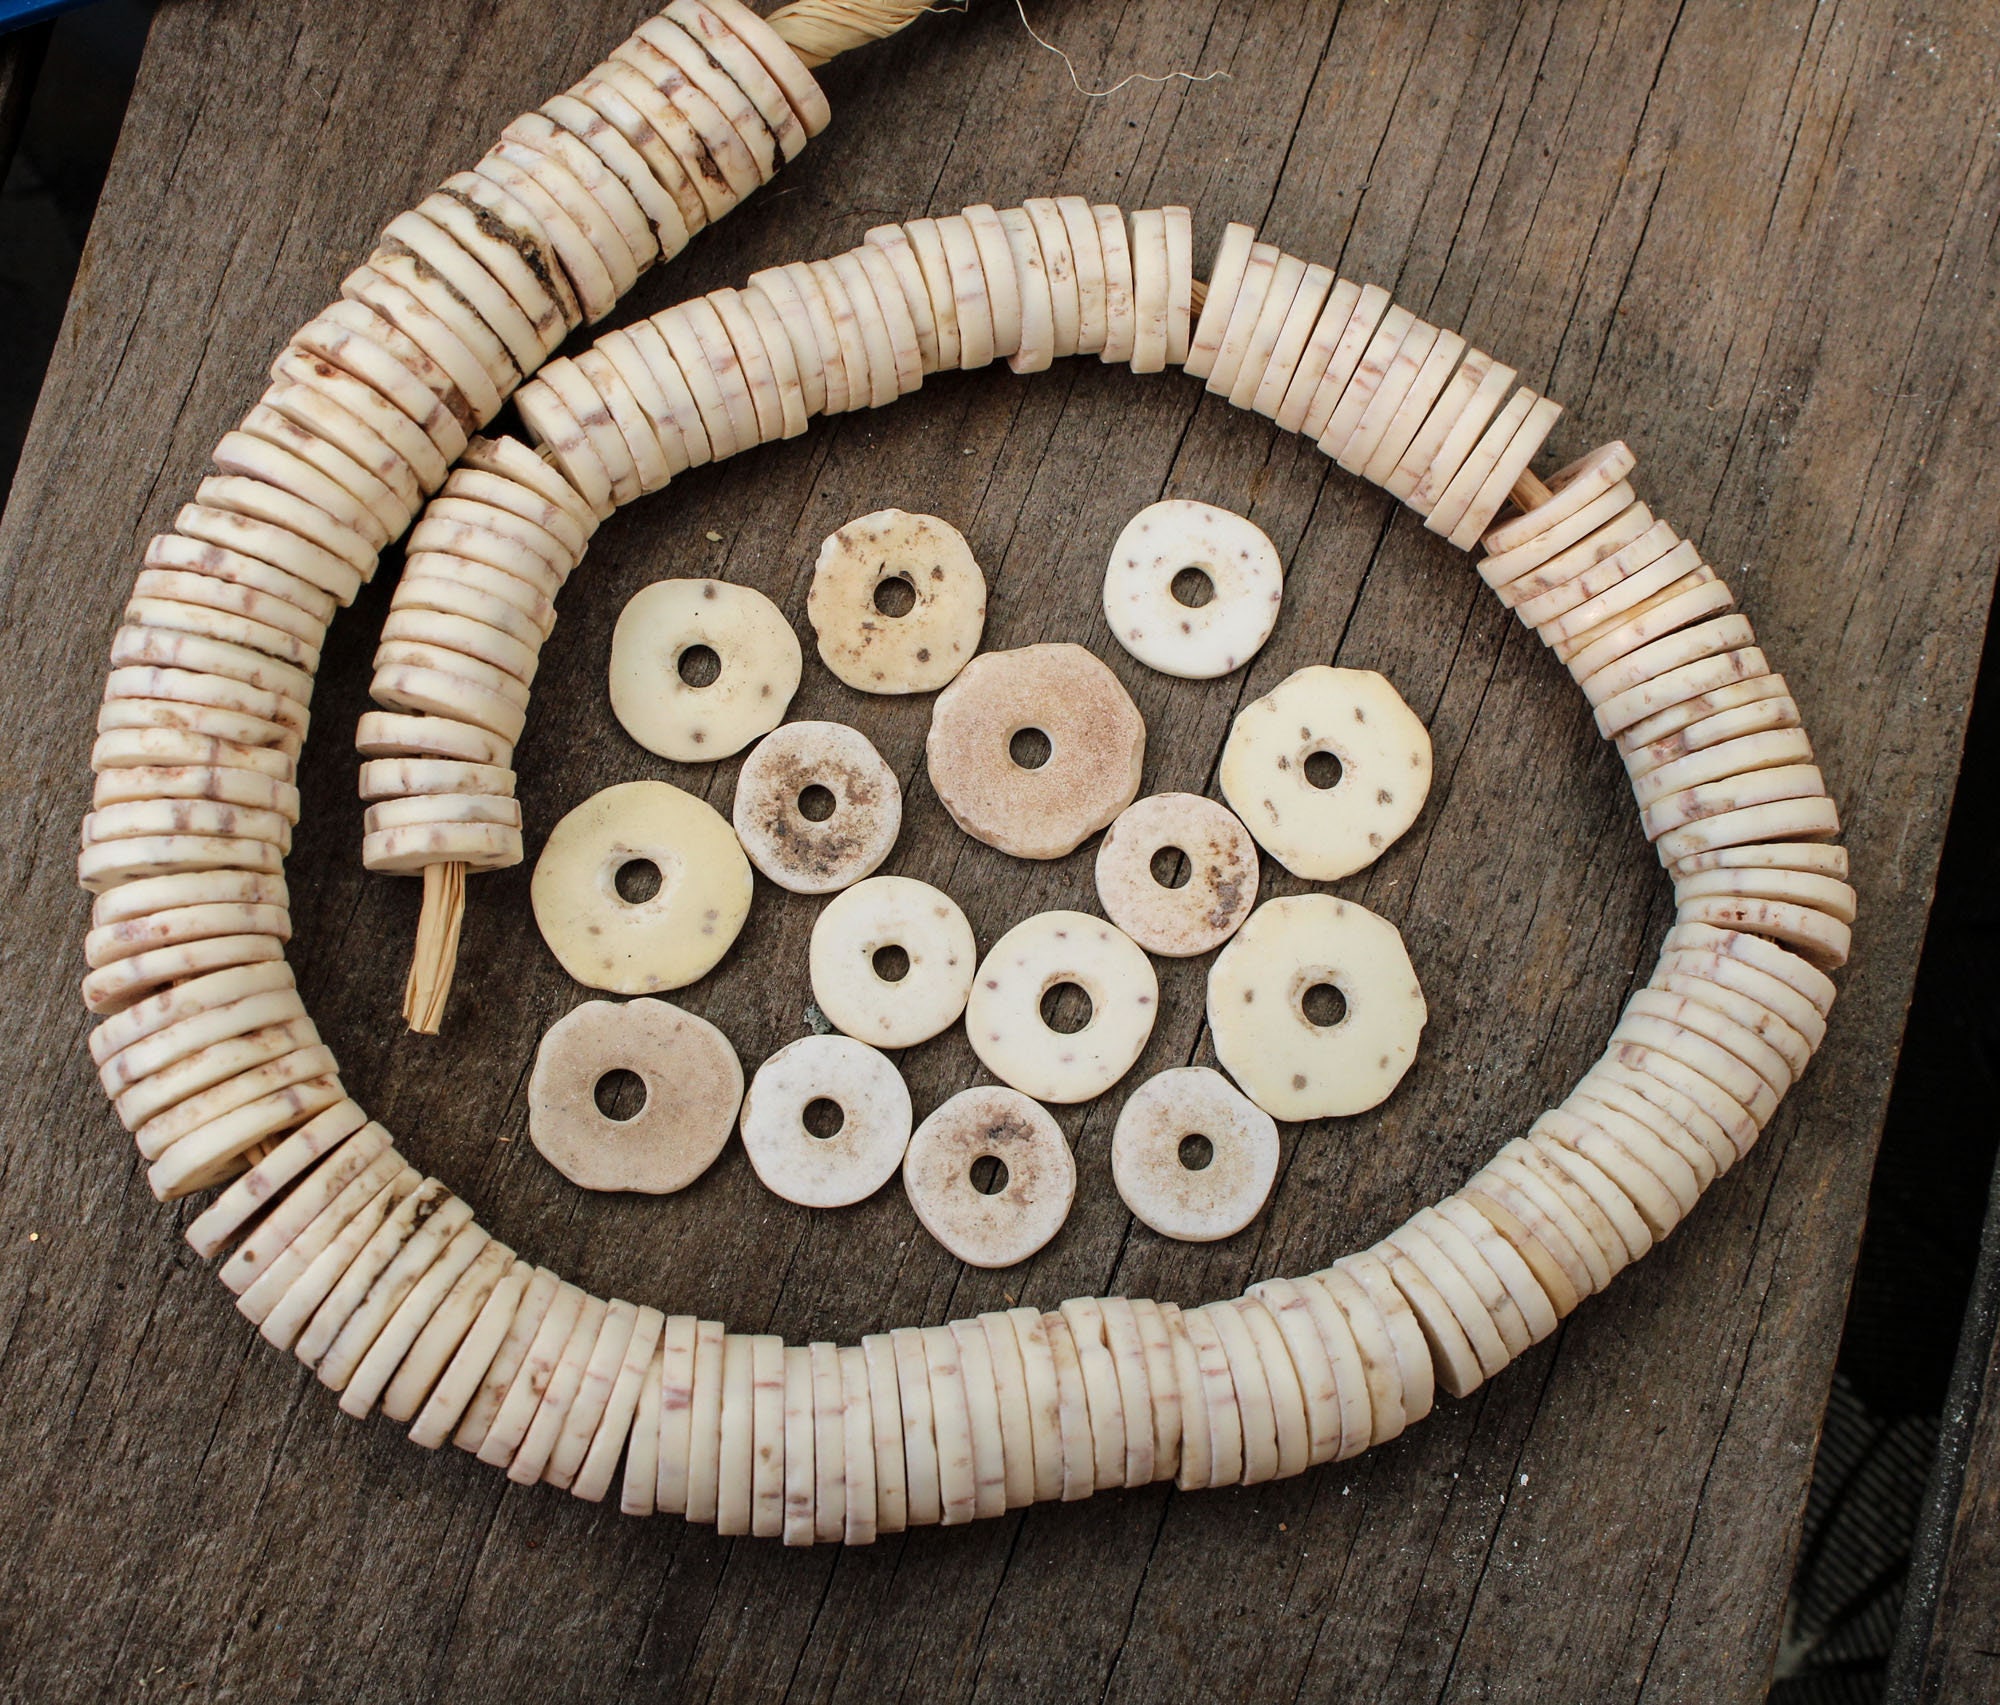 Ostrich Eggshell Beads: Natural Cream White Ostrich Egg Shell Beads, 25  Beads, Assorted Size / Bone Beads, Trade Beads, Jewelry Supplies 